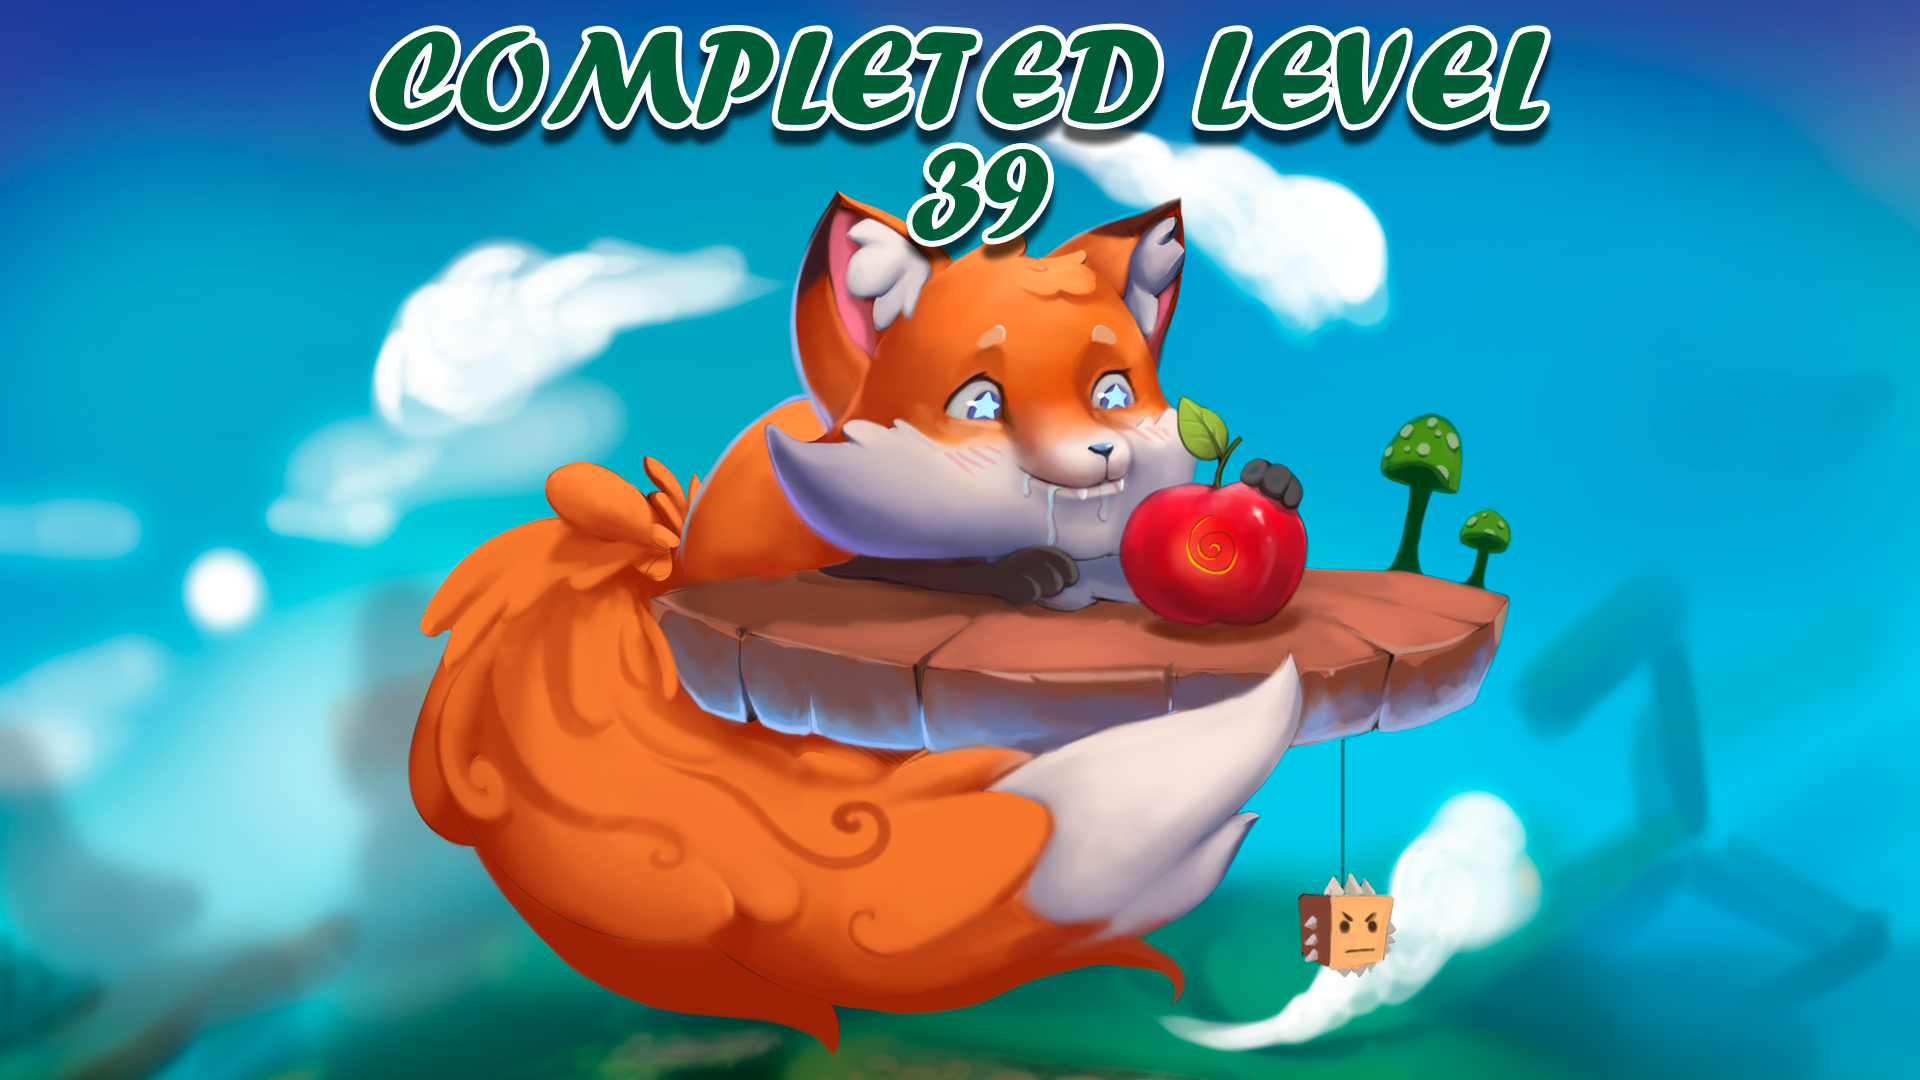 39 levels completed